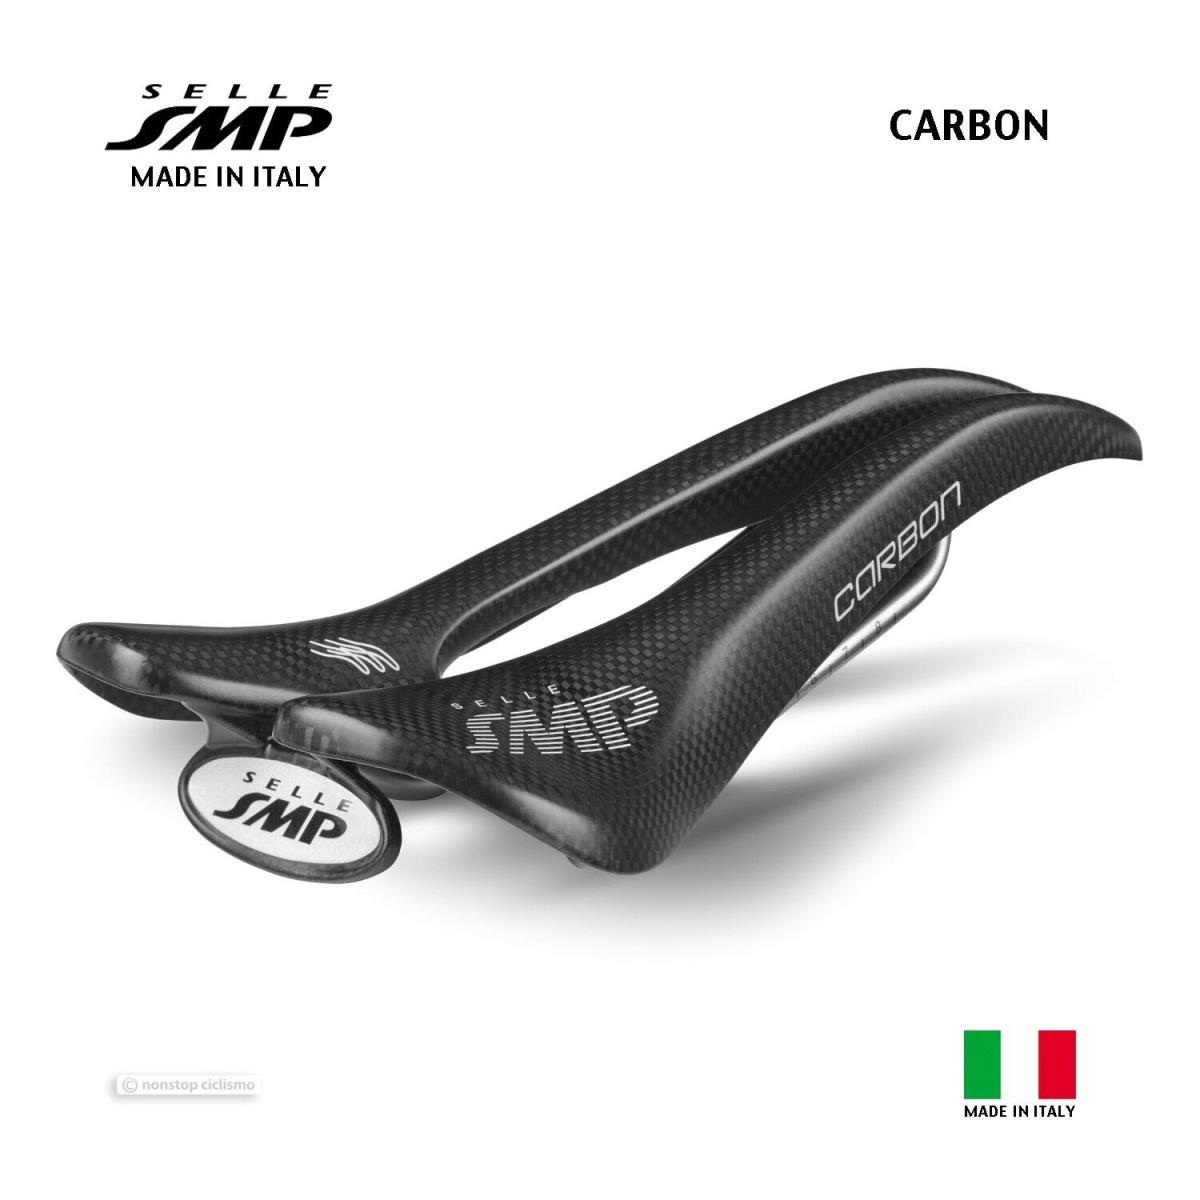 Selle Smp Carbon Saddle : Black - Made IN Italy